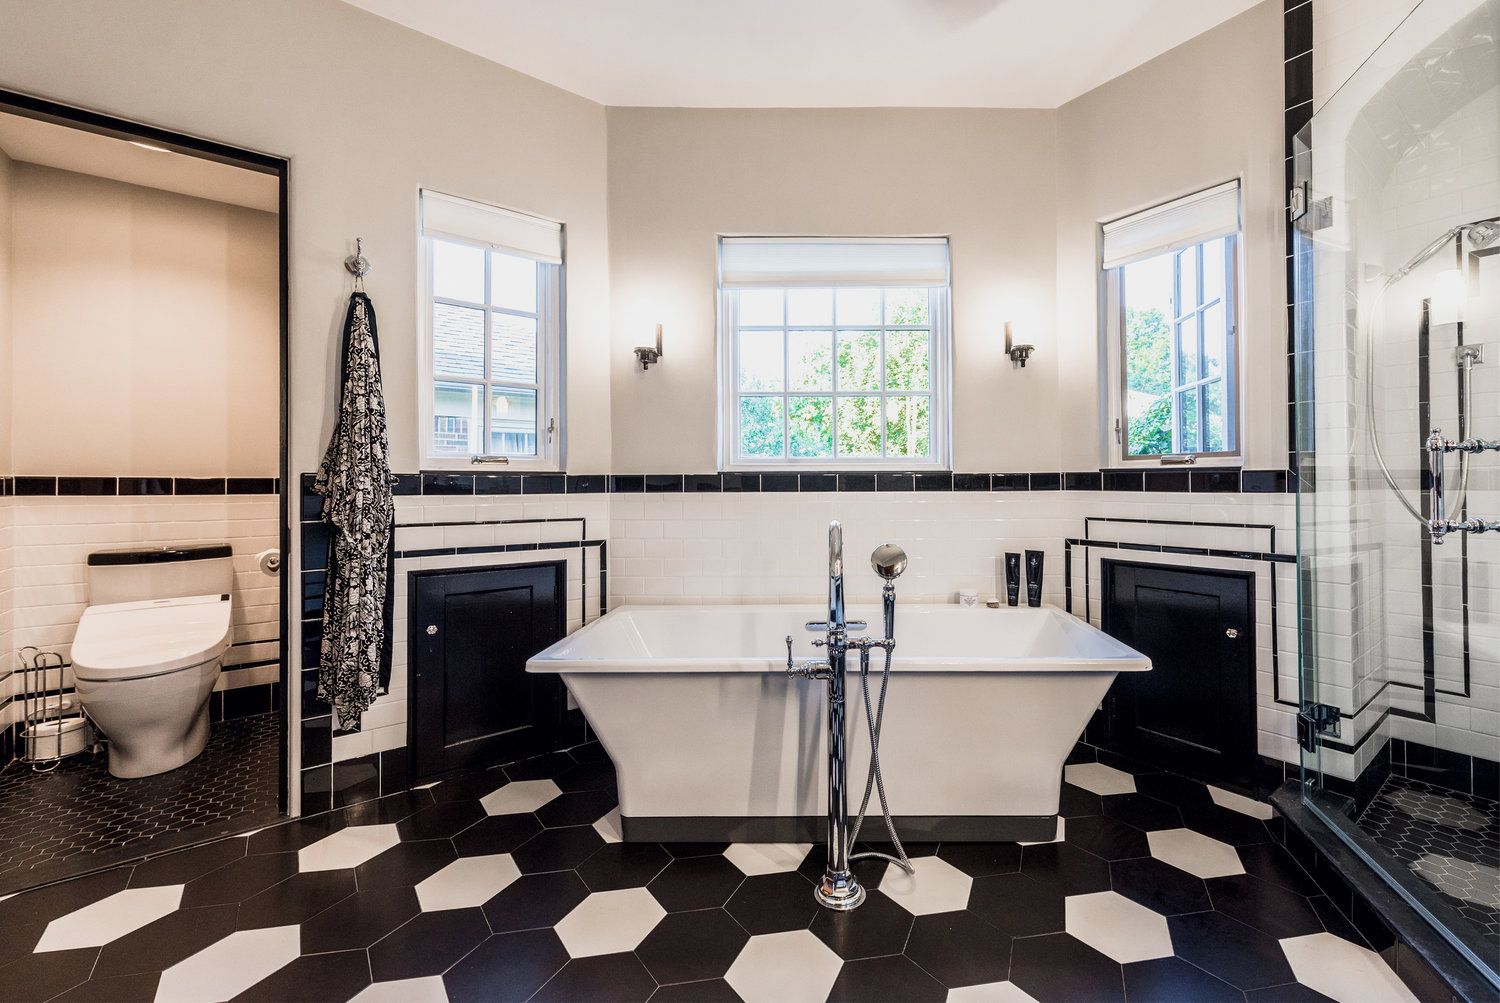 Existing small storage doors were kept and painted black to add more contrast to the wall tile and blend more seamlessly with the row of black wall tile along the floor